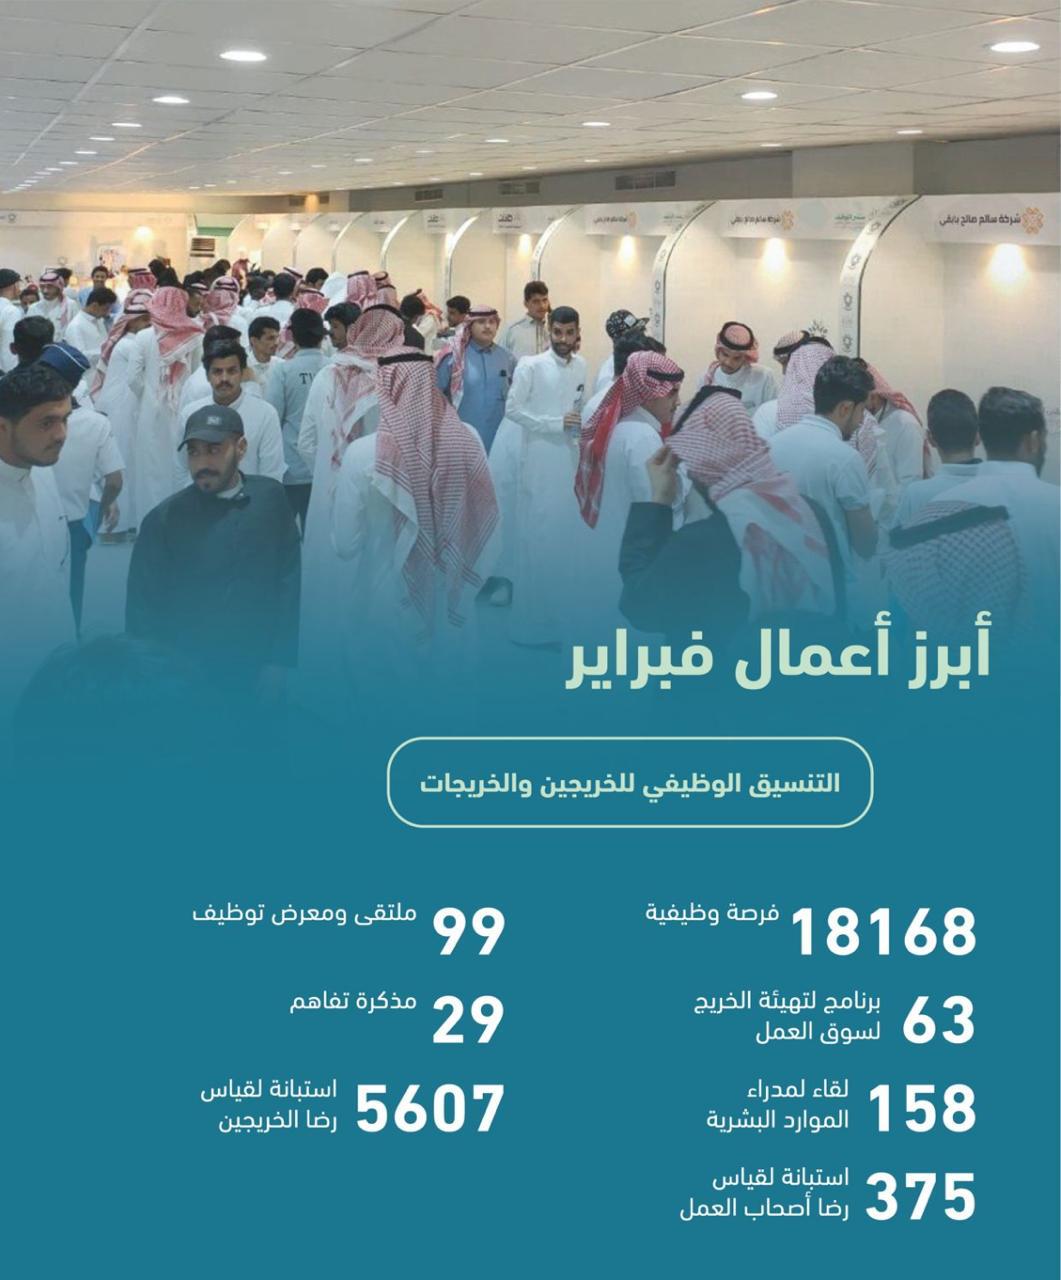 “Technical Training” Provides More Than 18,000 Job Opportunities for Graduates in February